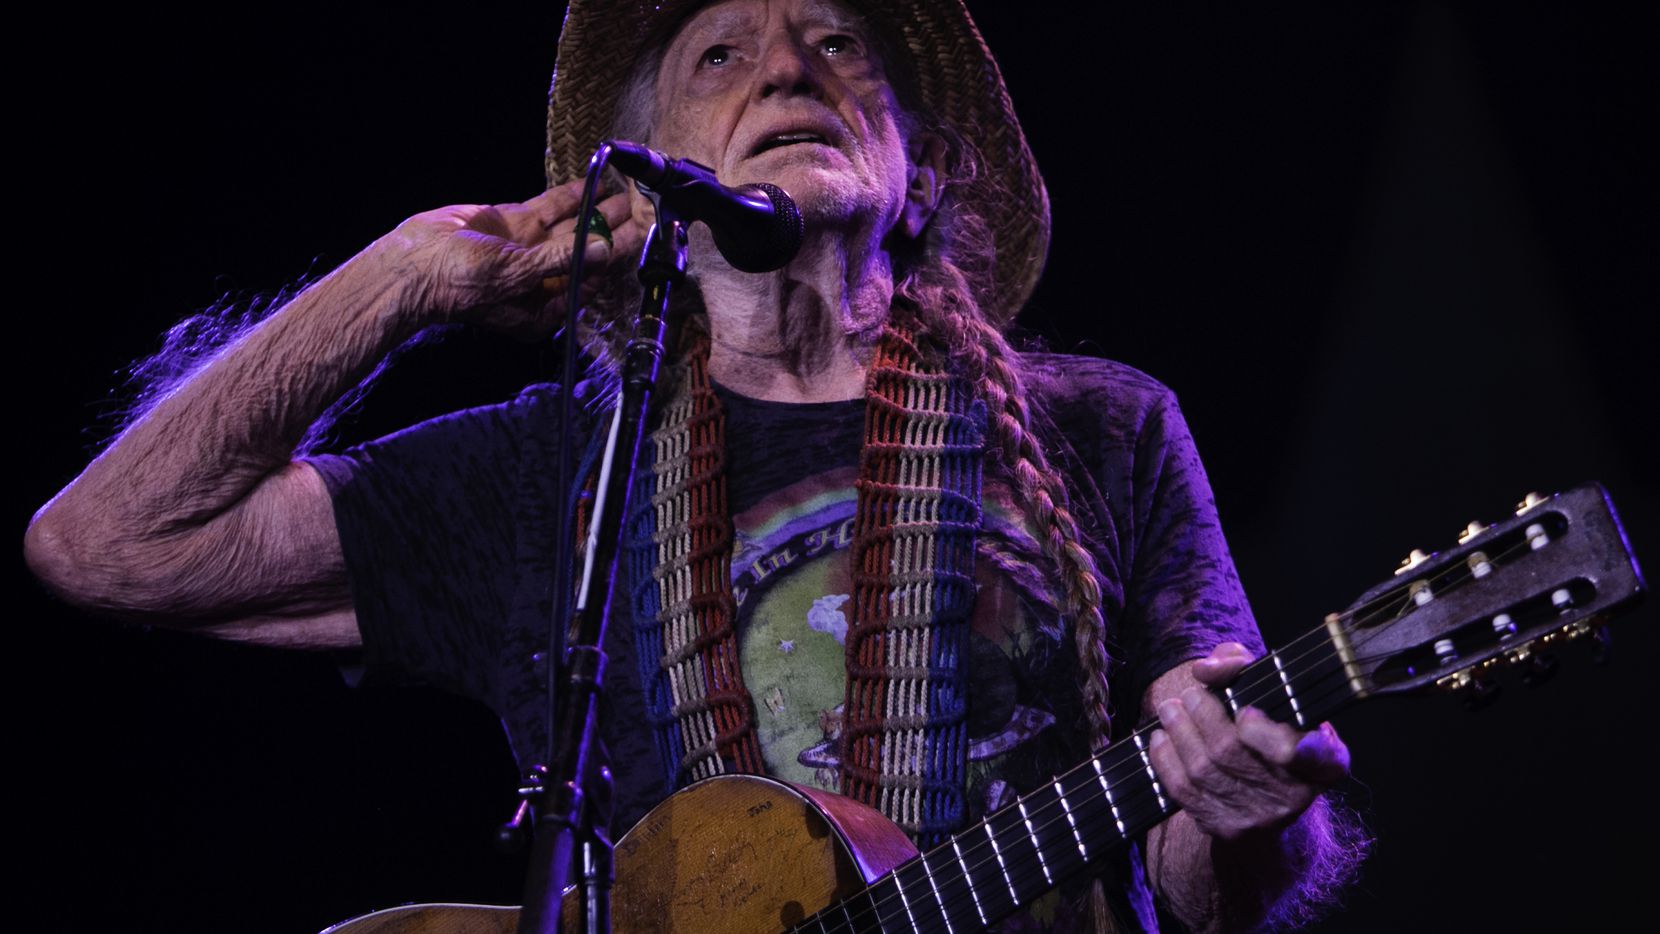 Willie Nelson performs during the Outlaw Music Festival in Dallas in 2017. He made a return...